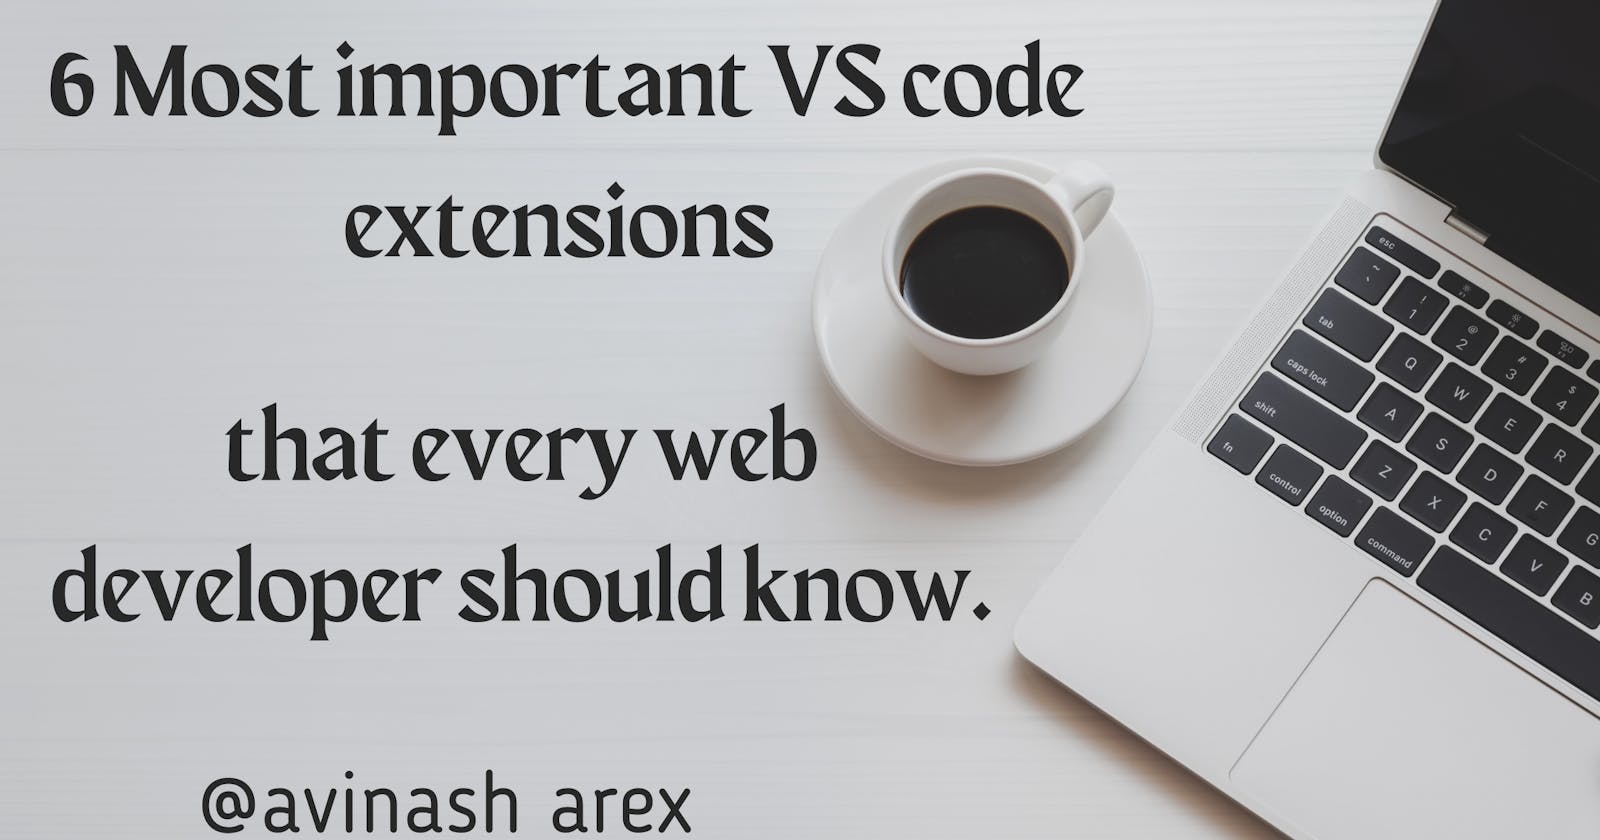 6 Most important VS code extensions that every web developer should know.